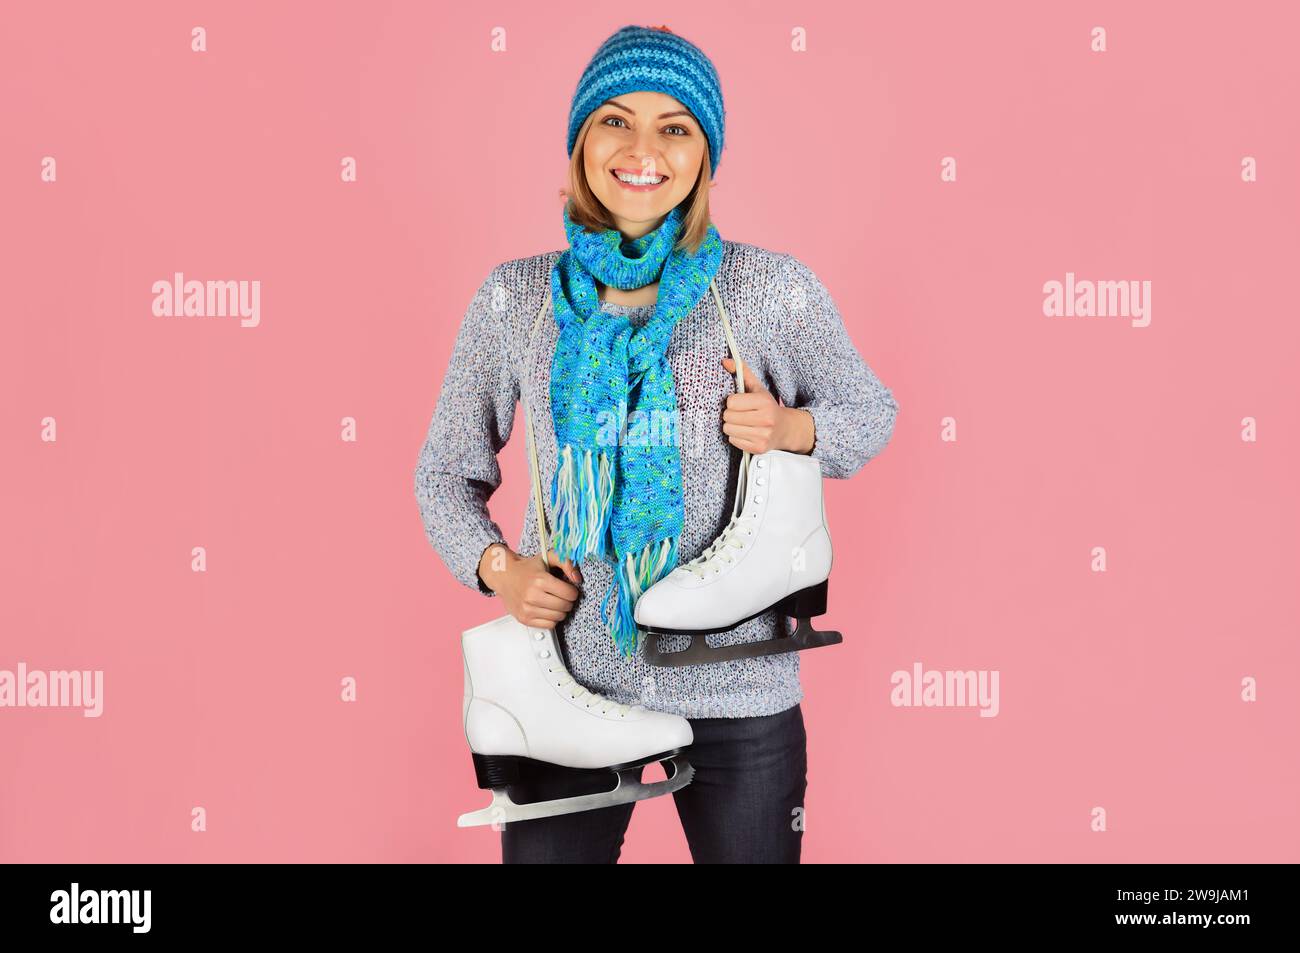 Smiling girl in knitted sweater, scarf and hat with ice skates. Winter sport activity. Pretty woman in warm clothing with ice skates getting ready for Stock Photo